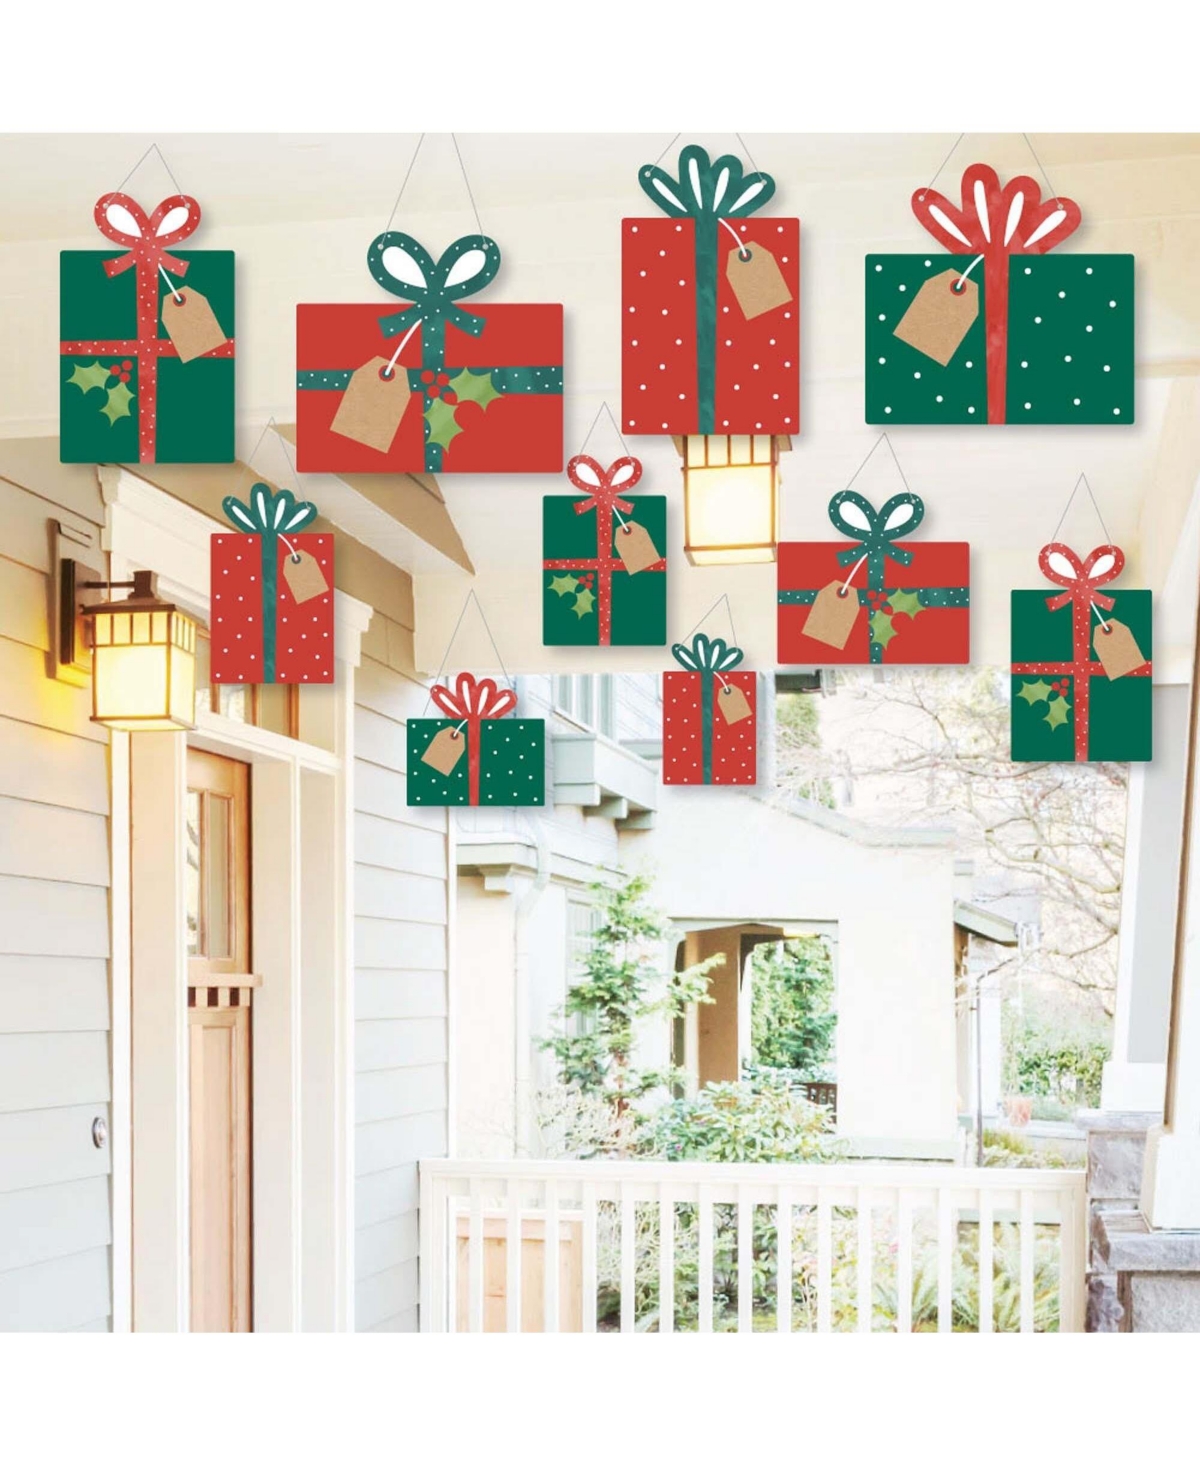 Hanging Happy Holiday Presents - Outdoor Christmas Porch Tree Yard Decor 10 Pc